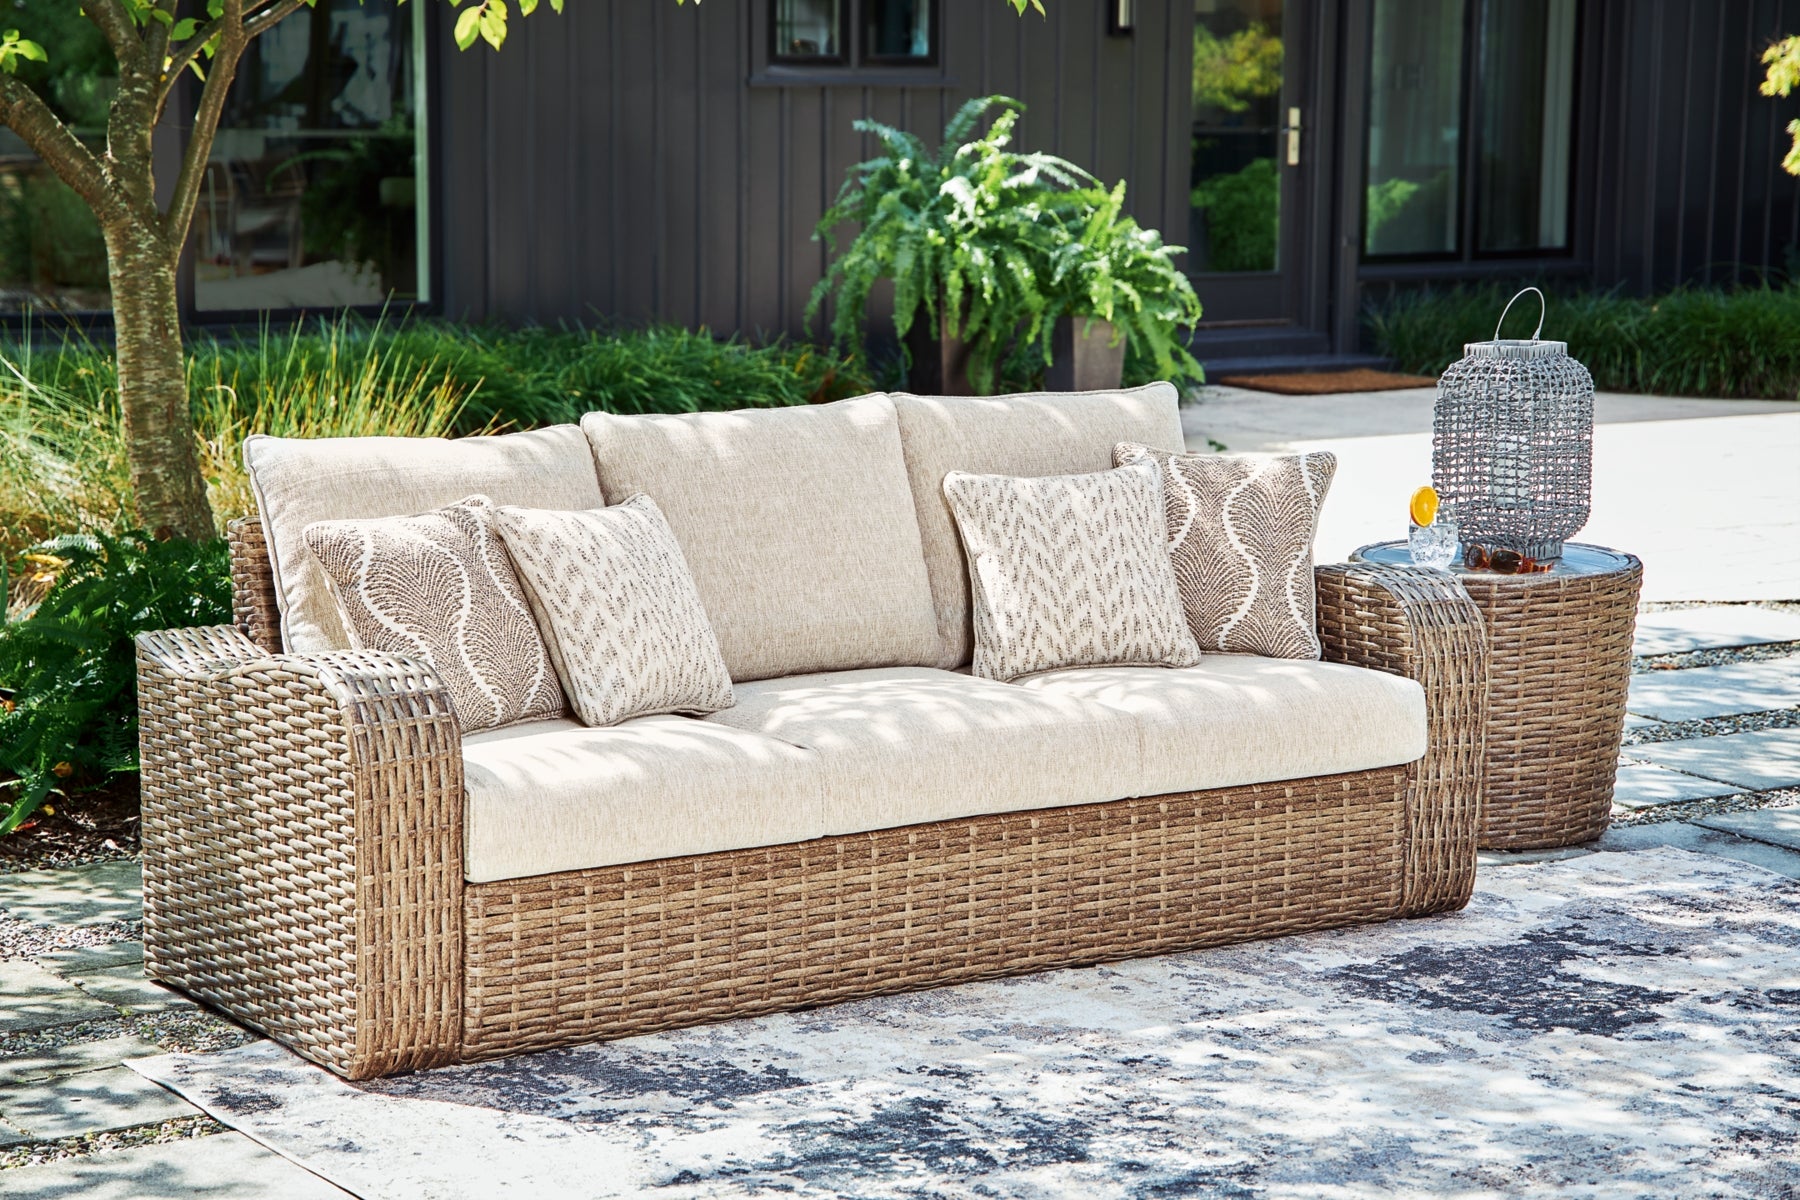 Sandy Bloom Outdoor Sofa with Cushion